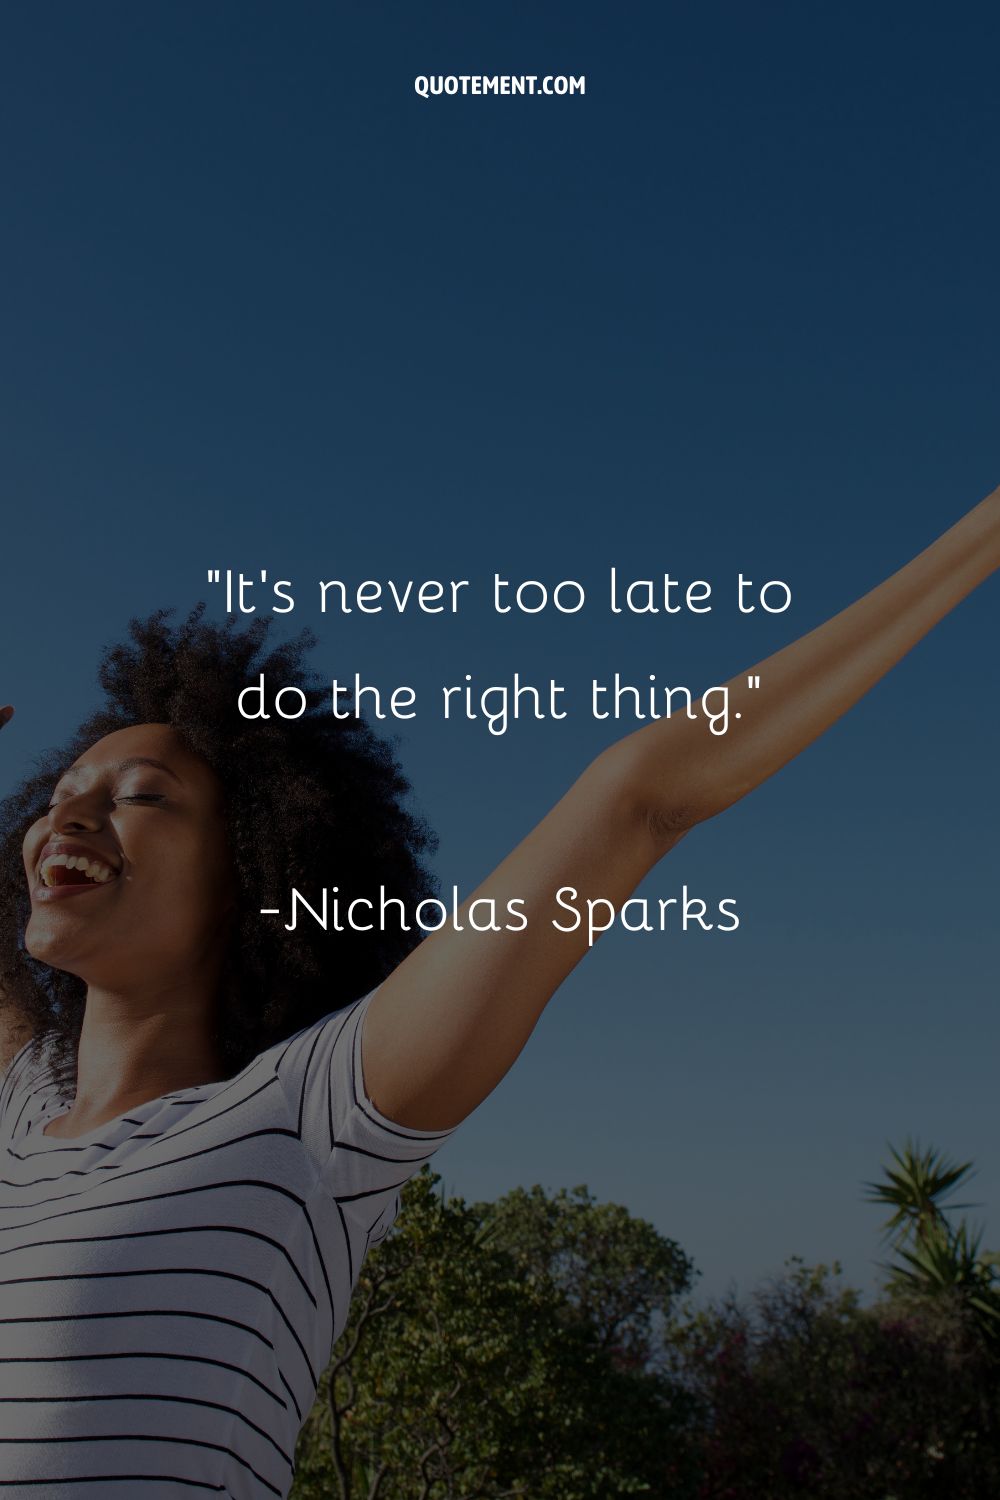 It’s never too late to do the right thing